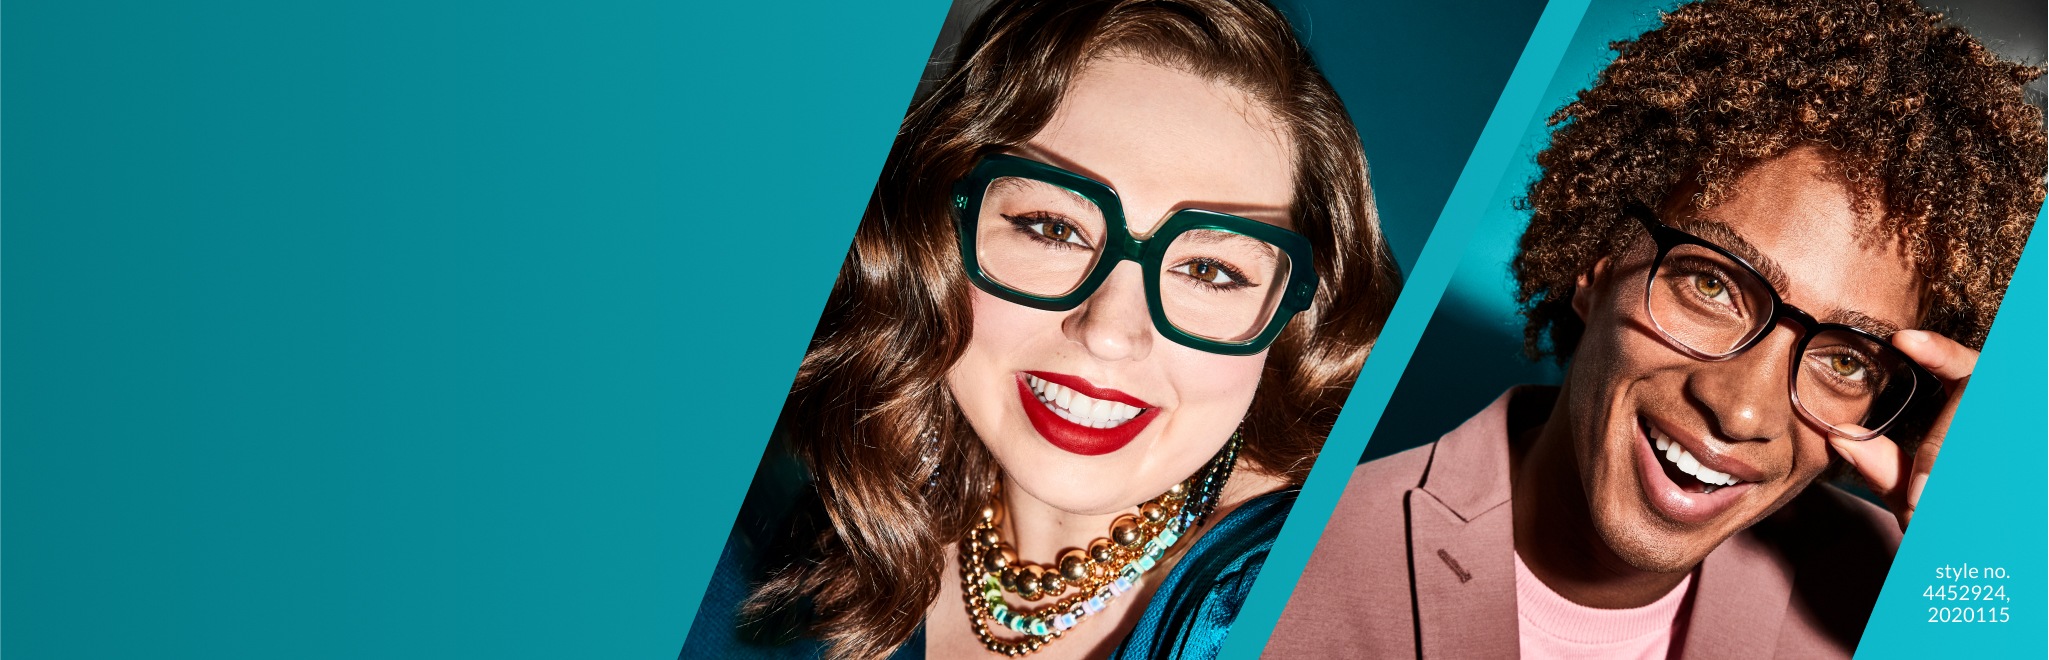 Woman in festive attire wears emerald Good to Be Square glasses #4452924 from the Iris Apfel x Zenni collection and man in casual suit wears ombre square glasses #2020115. 